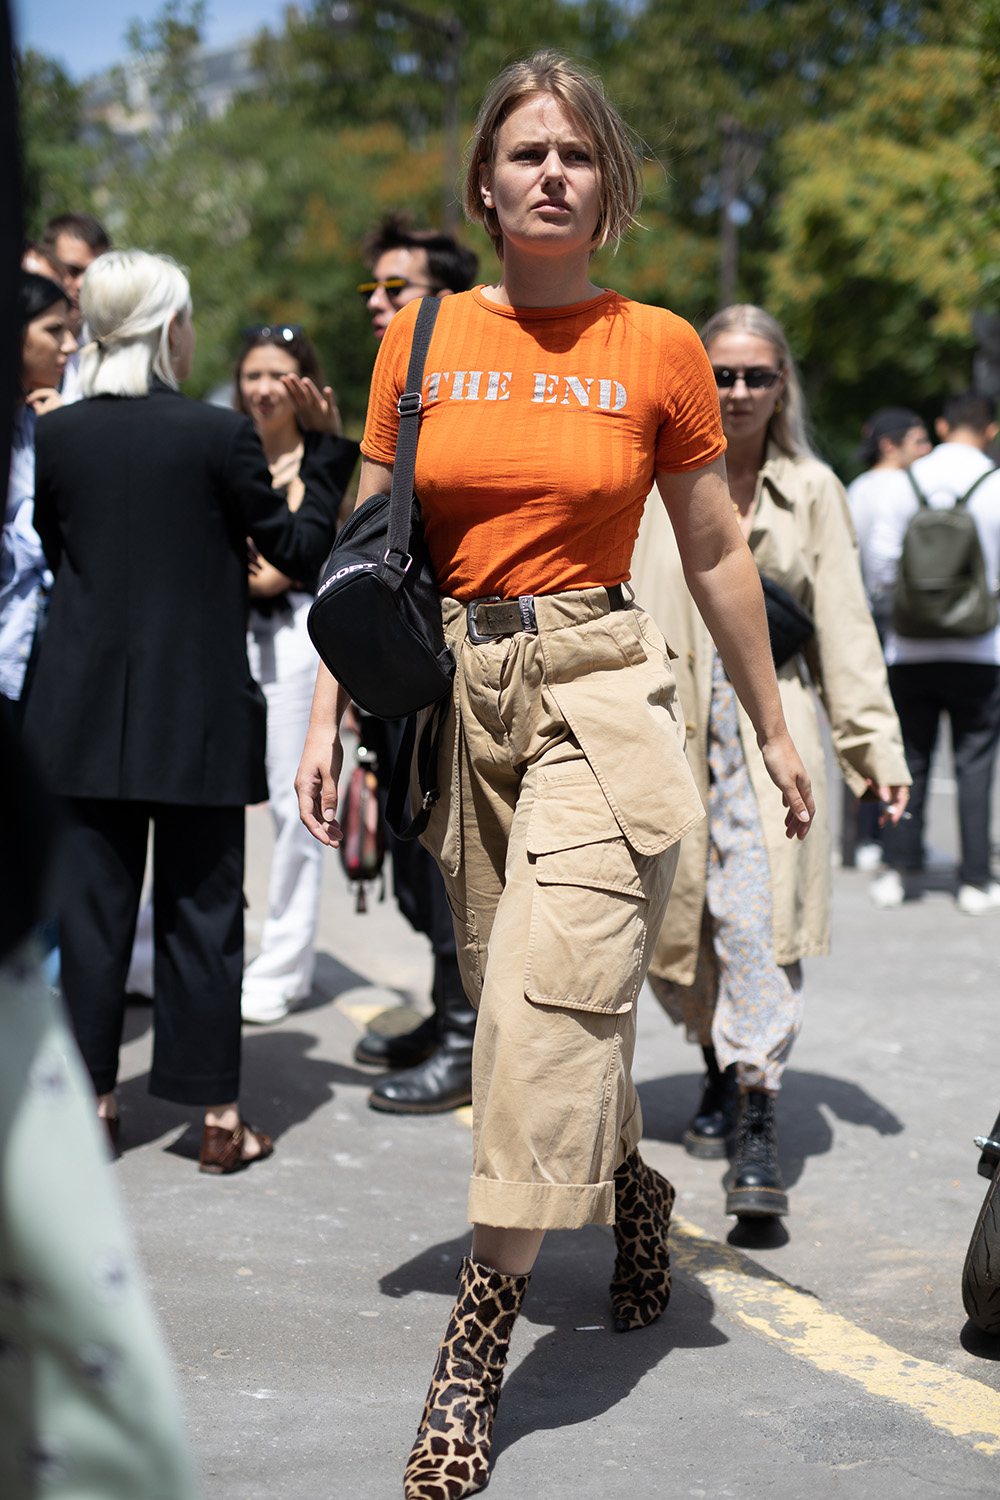 Precious Cargo: The practical pant trend that’s replacing your mom jeans (and fast) | PARIS, FRANCE - JUNE 21: A guest is seen on the street during Paris Men's Fashion Week S/S 2019 wearing an orange shirt with khaki cargo pants and animal print shoes on June 21, 2018 in Paris, France. (Photo by Matthew Sperzel/Getty Images)